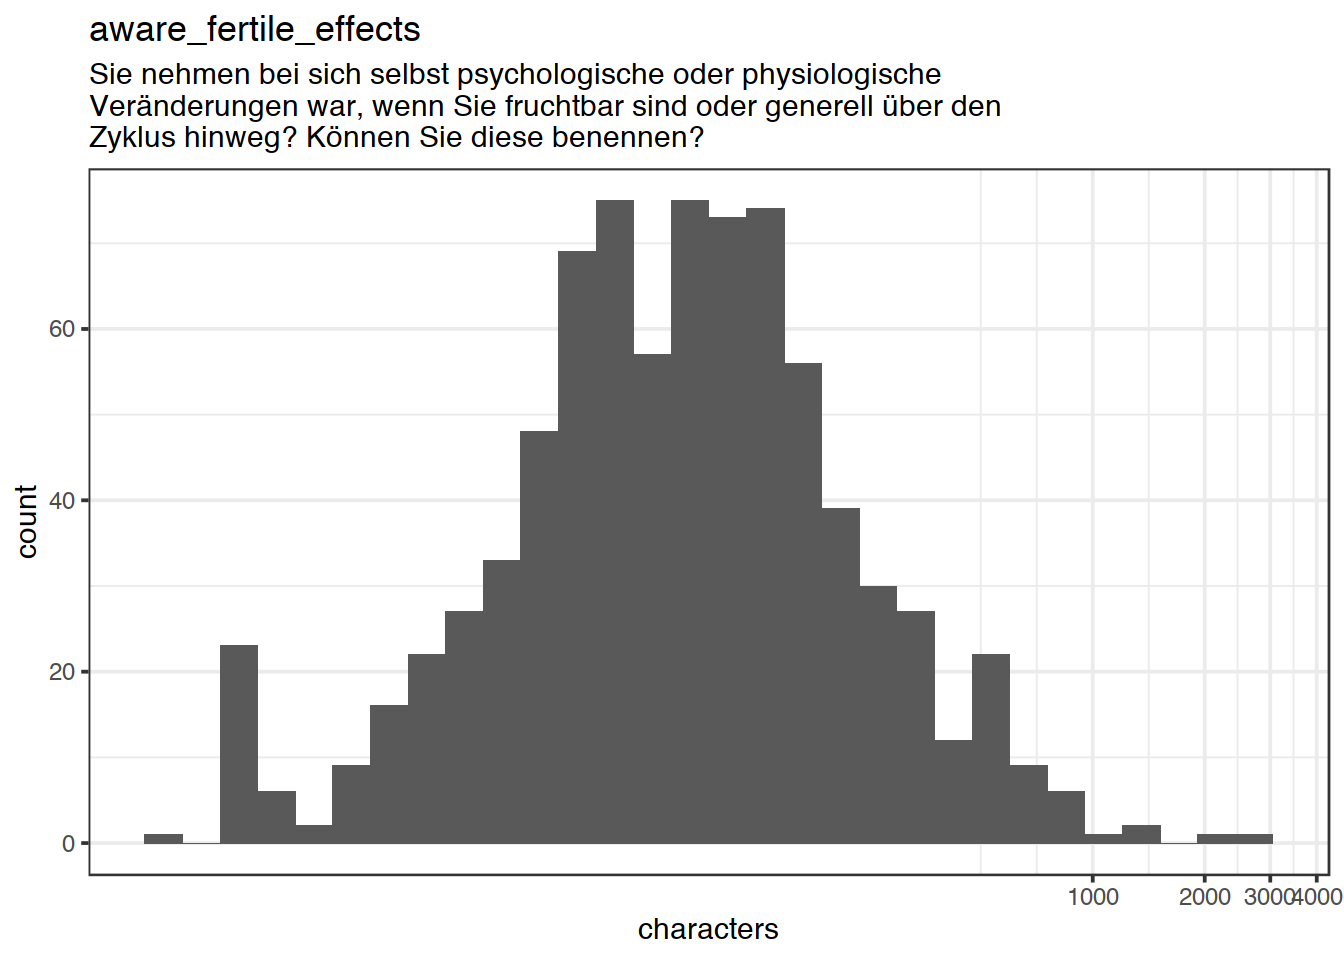 Distribution of values for aware_fertile_effects